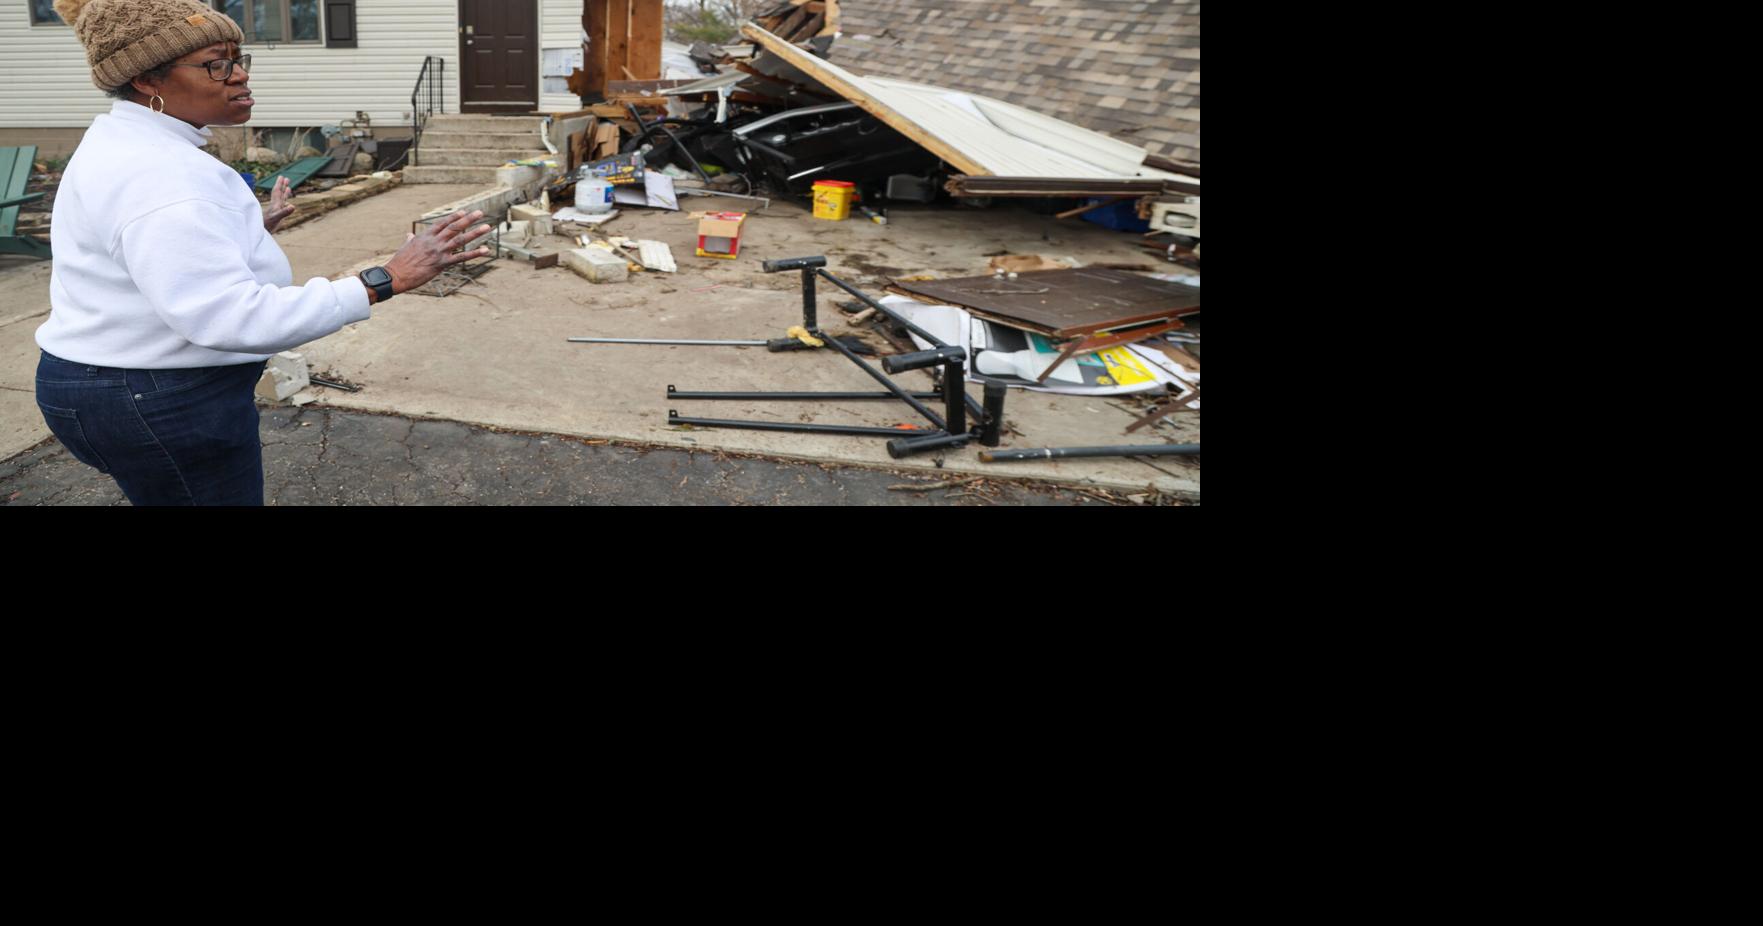 U.S. Small Business Administration offers assistance to businesses hit by tornados and storms